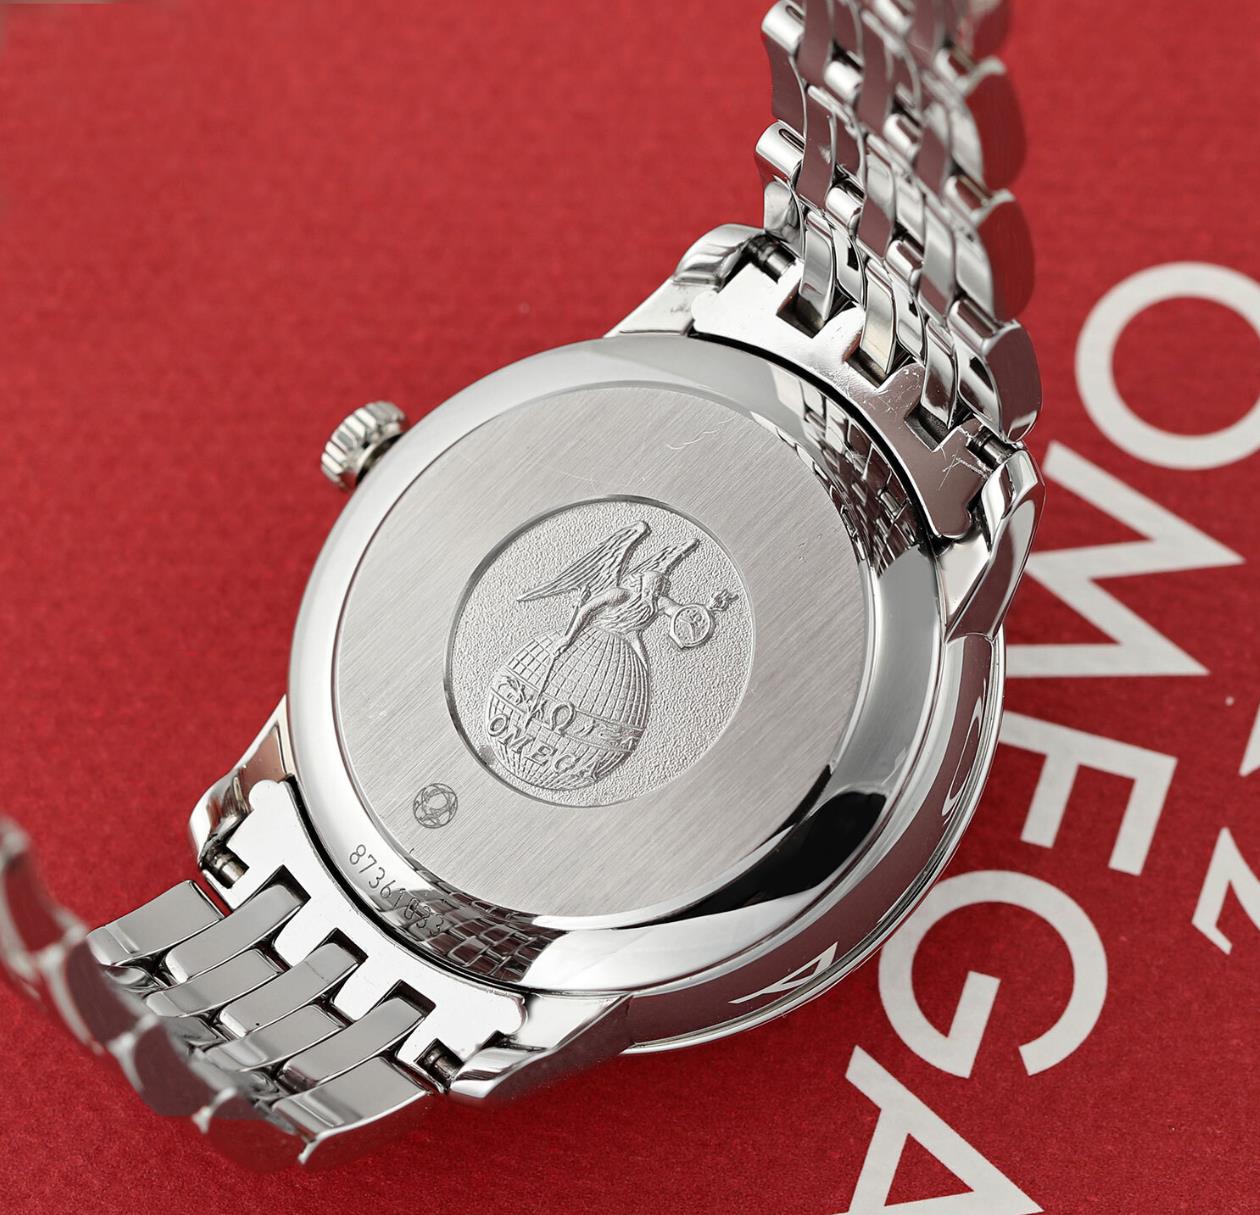 The Swiss made fake watch is equipped with caliber 2500.